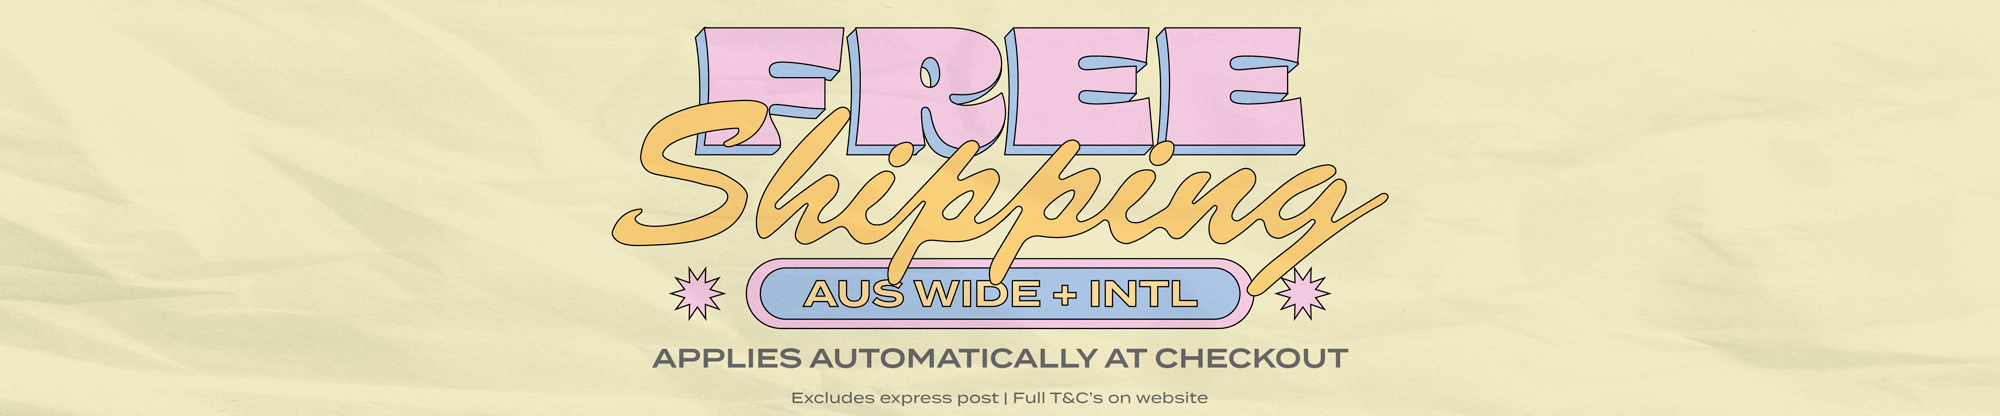 Flashing Banner, text reads: 'Free Shipping, Aus wide + International, applies automatically at checkout, excludes express post | Full T&C's on website.' Banner is yellow blue and pink.